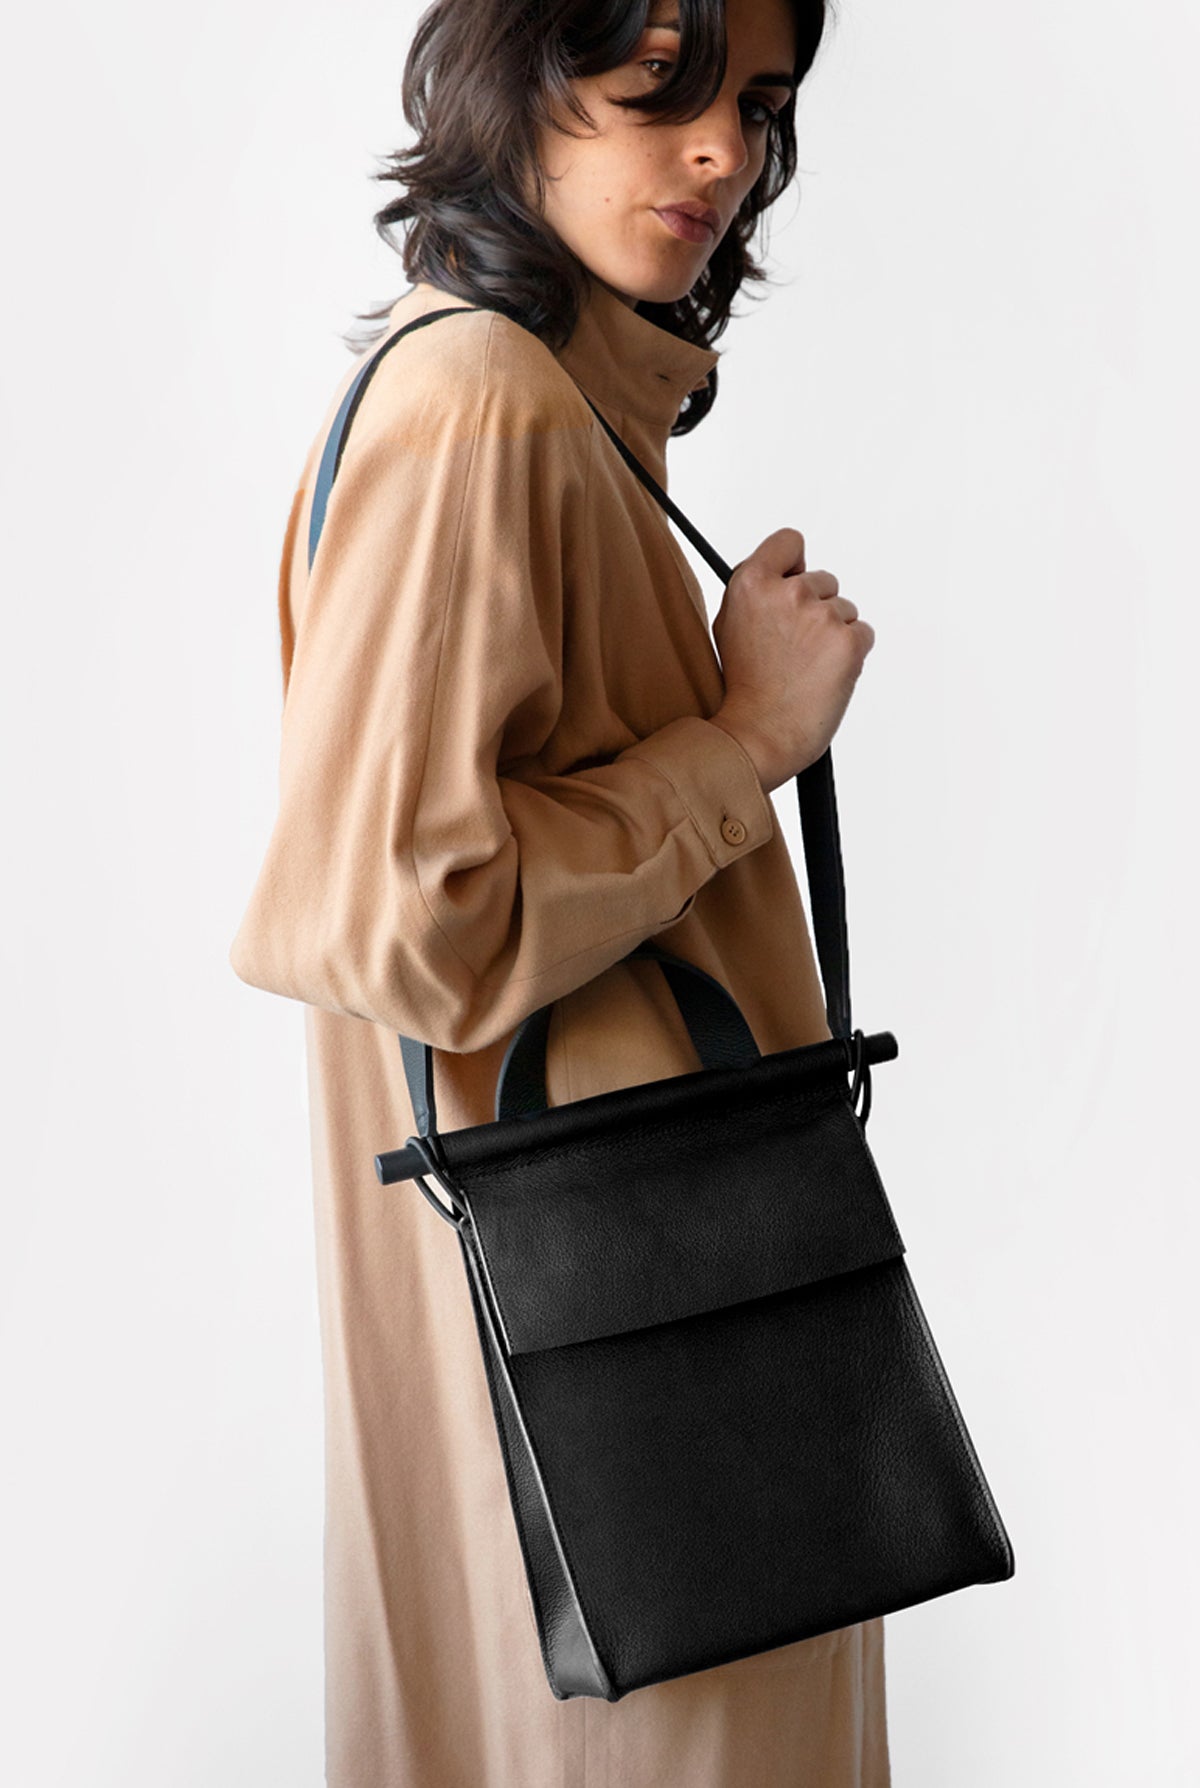 Carryalls and Accessories for Creators | The Atelier YUL